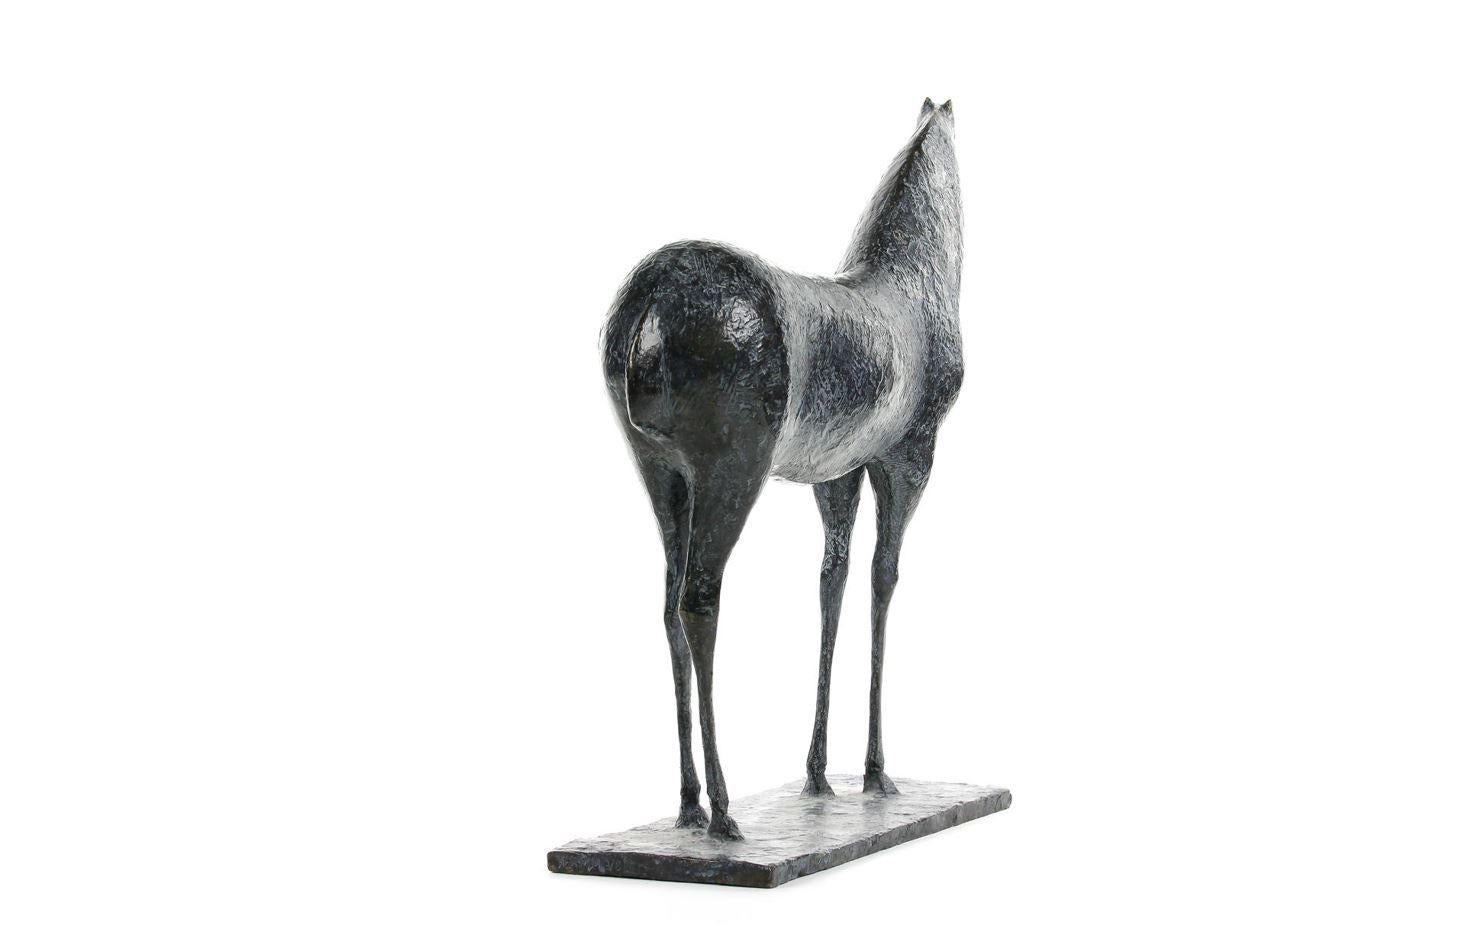 Horse X (Cheval X) is a bronze sculpture by French contemporary artist Pierre Yermia.
47 cm × 51 cm × 14 cm. Limited-edition of 8 copies and 4 artist's proofs. Each copy is signed and numbered.
